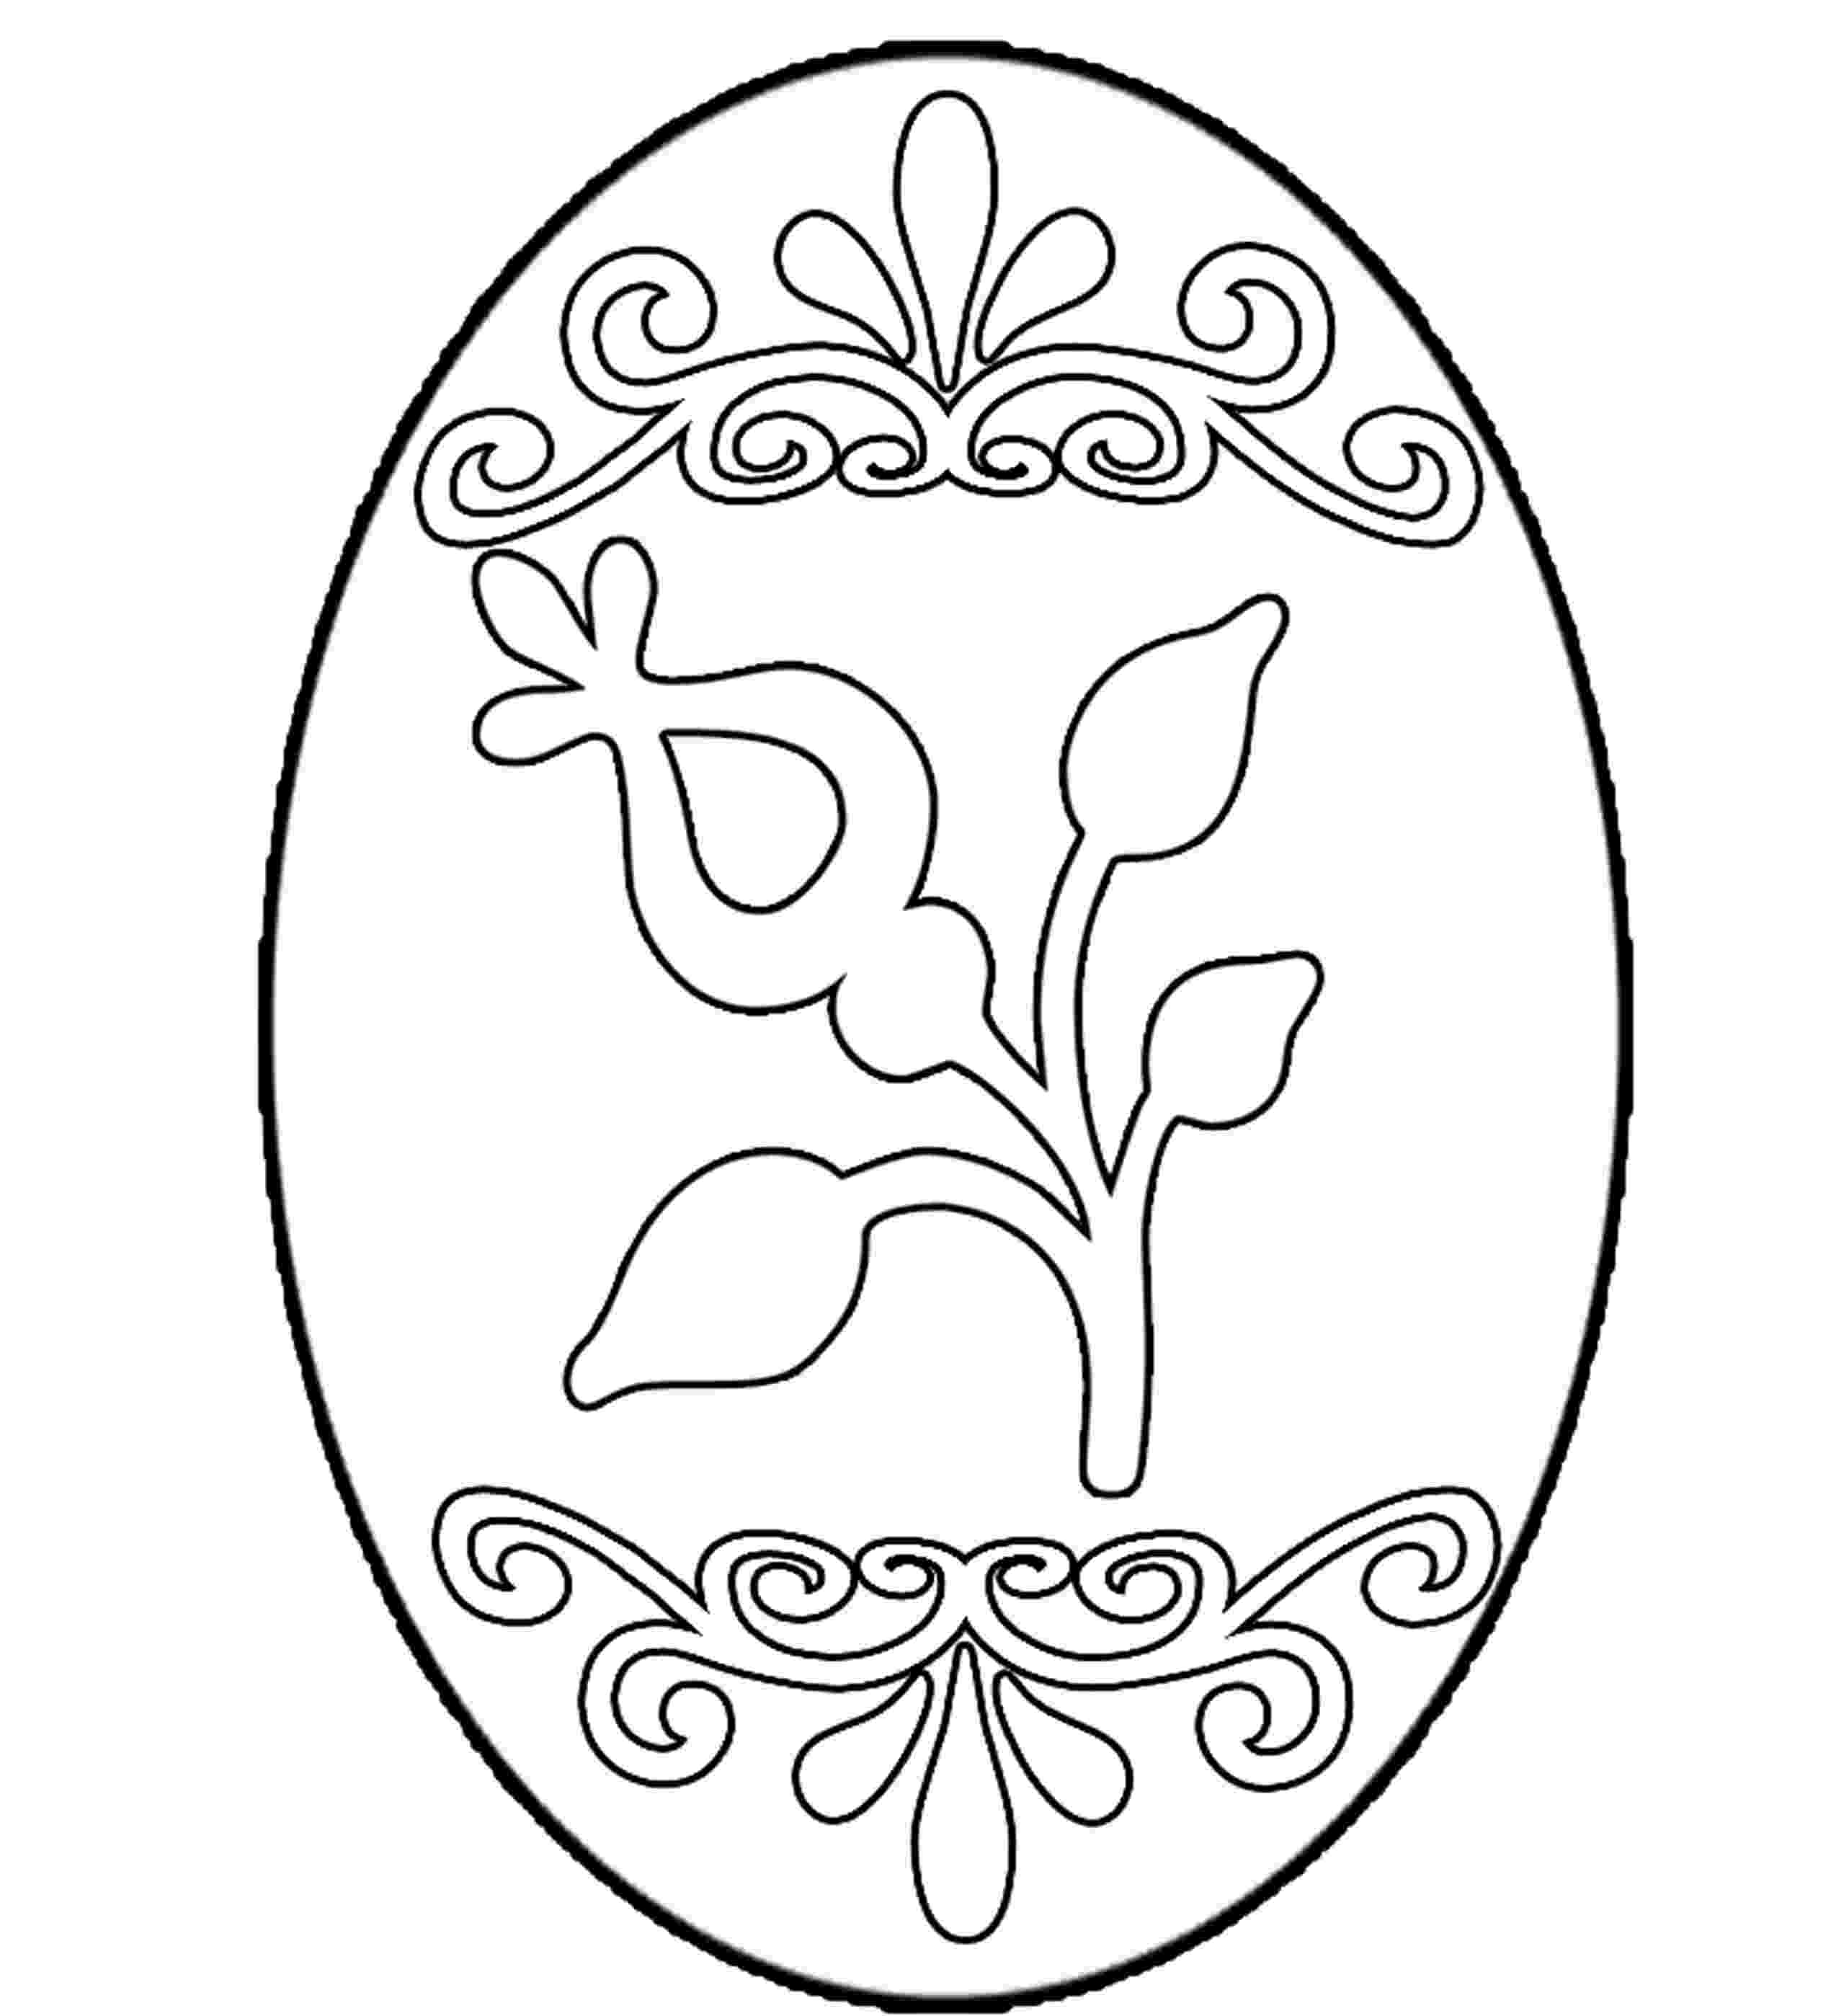 egg coloring pages easter egg coloring pages twopartswhimsicalonepartpeculiar pages coloring egg 